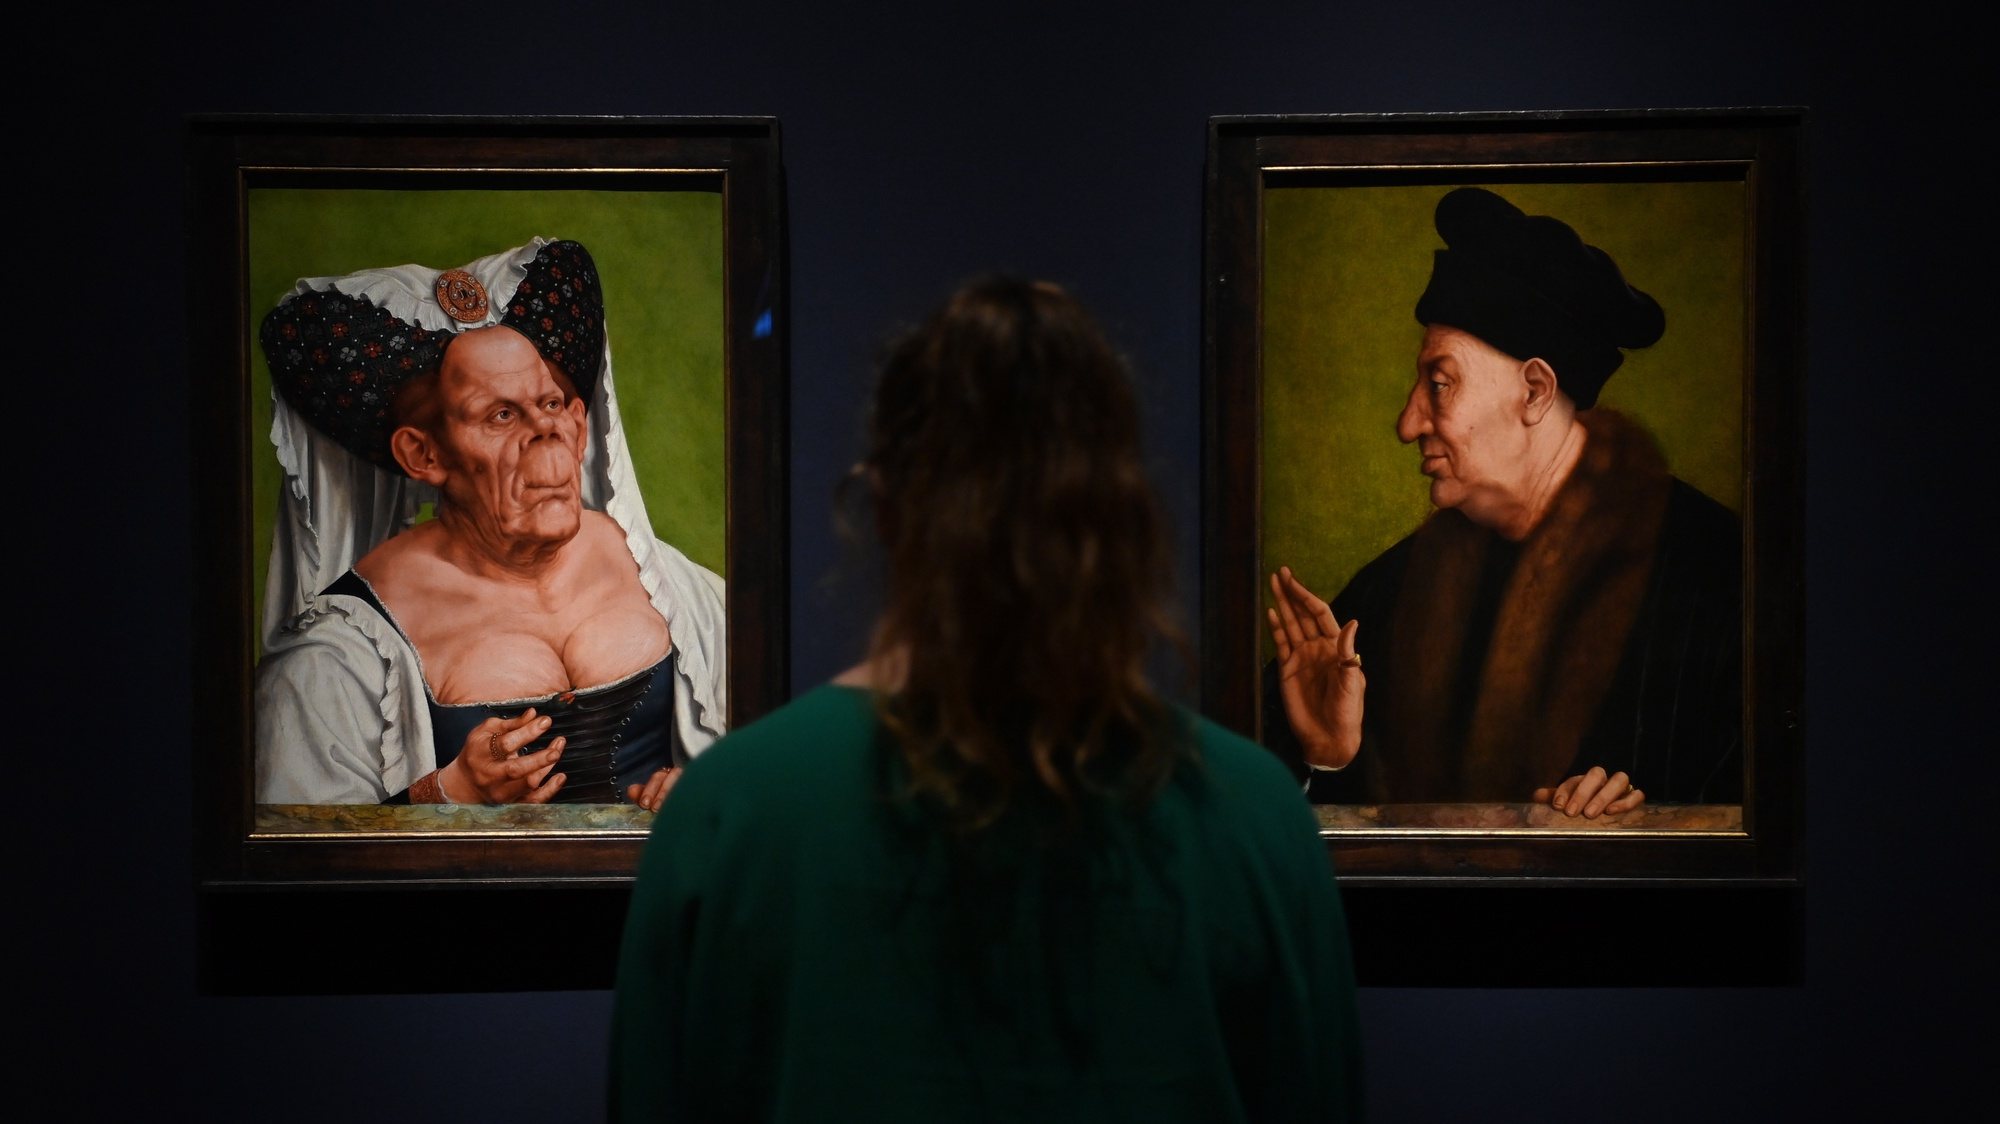 epa10521918 A National Gallery staff poses with Quinten Massys&#039; &#039;An Old Woman&#039; (The Ugly Duchess), dated from 1513 (L), and &#039;An Old Man&#039; from 1513 (R), at the National Gallery in London, Britain, 14 March  2023. The exhibition &#039;The Ugly Duchess: Beauty and Satire in the Renaissance&#039; runs from 16 March to 11 June 2023.  EPA/ANDY RAIN